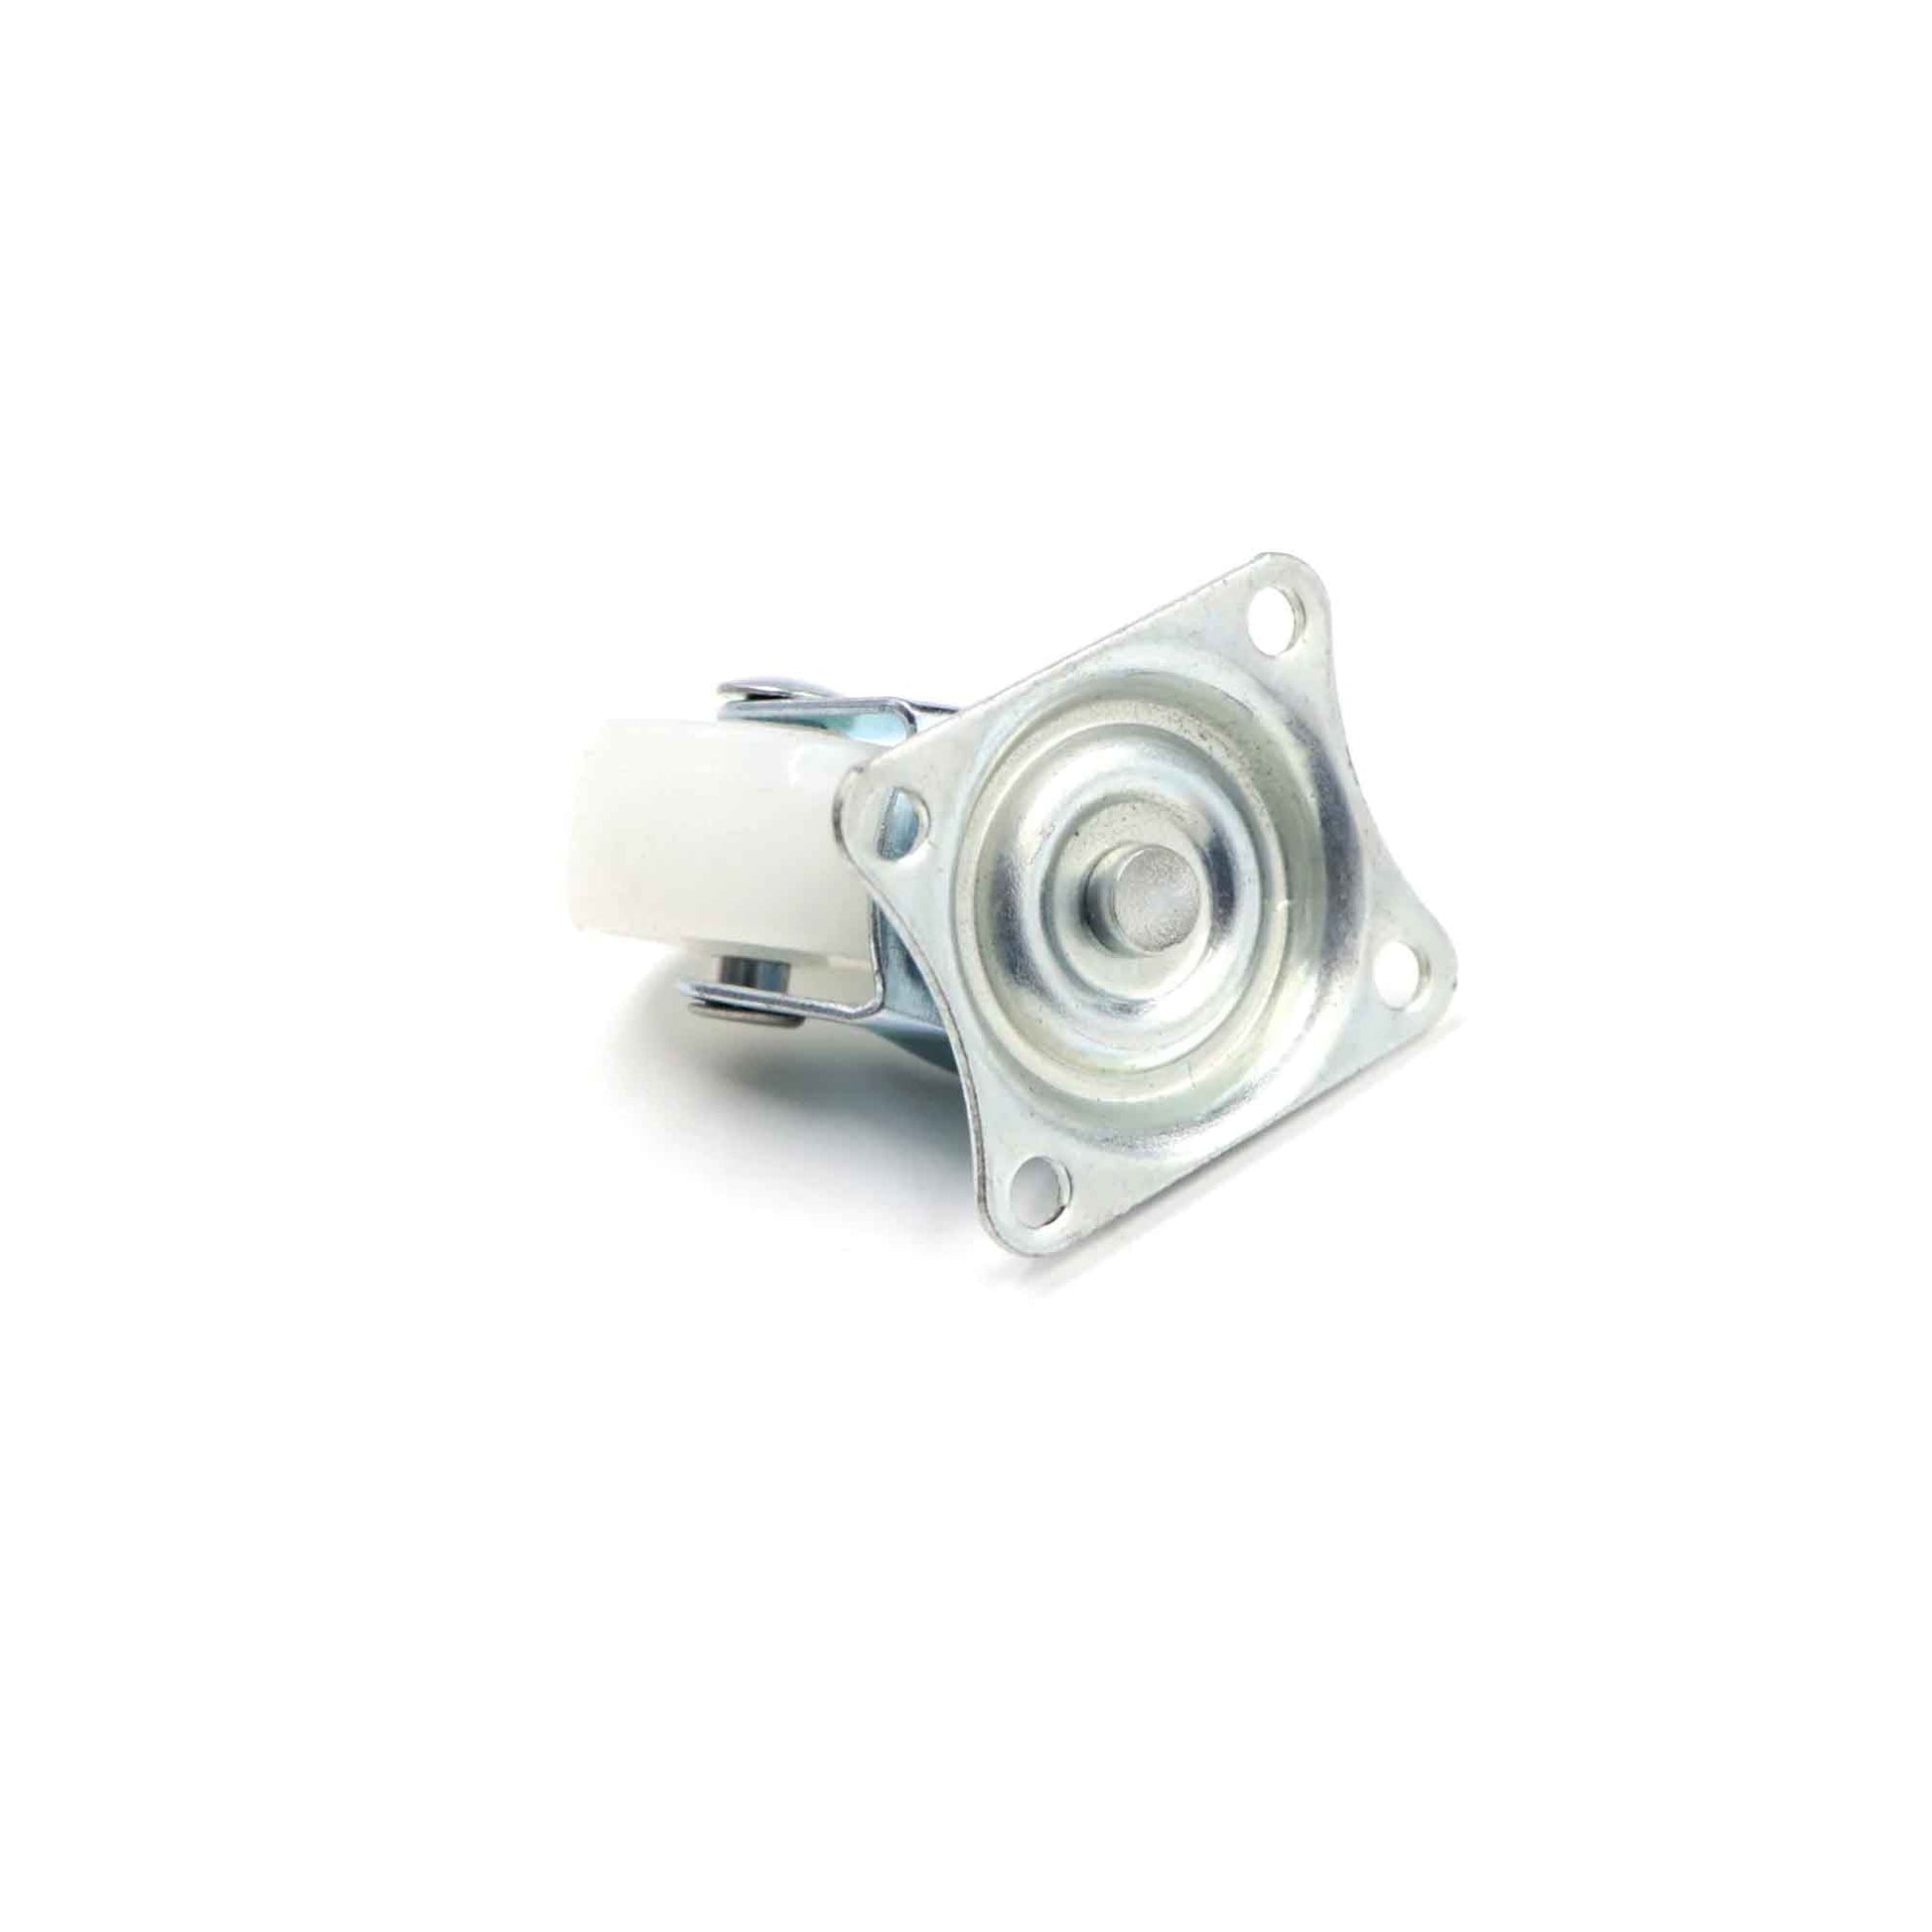 Caster Wheel for 2WD Transparent Smart Robot Car Chassis